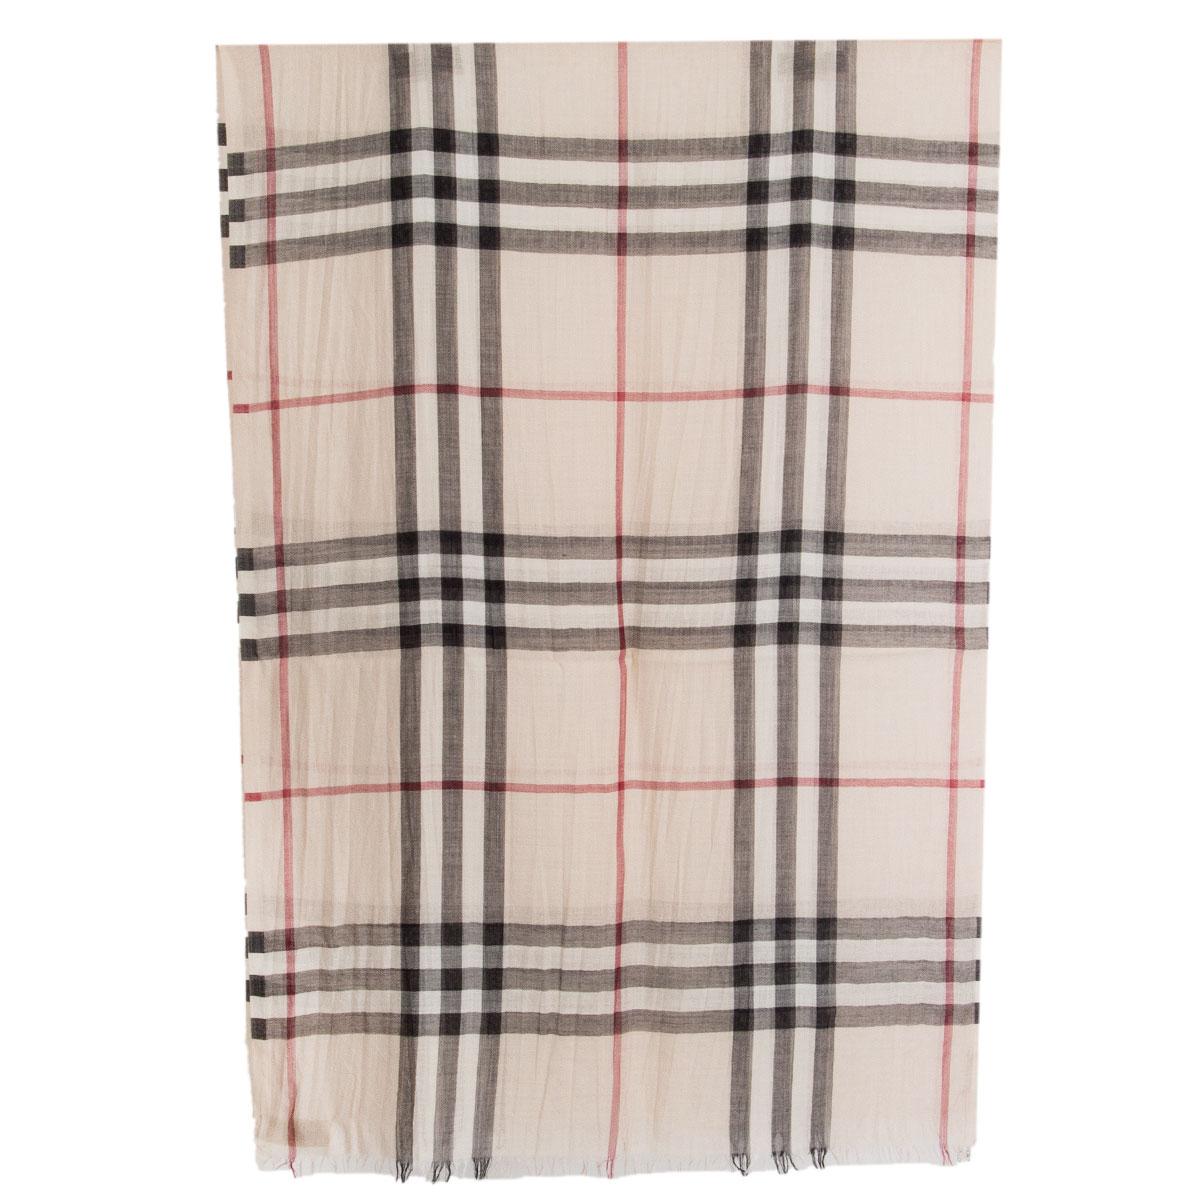 100% authentic Burberry classic check shawl in light beige, black and red virgin wool (51%) and silk (49%). Has been worn and is in excellent condition.

Height	70cm (27.3in)
Length	220cm (85.8in)

All our listings include only the listed item